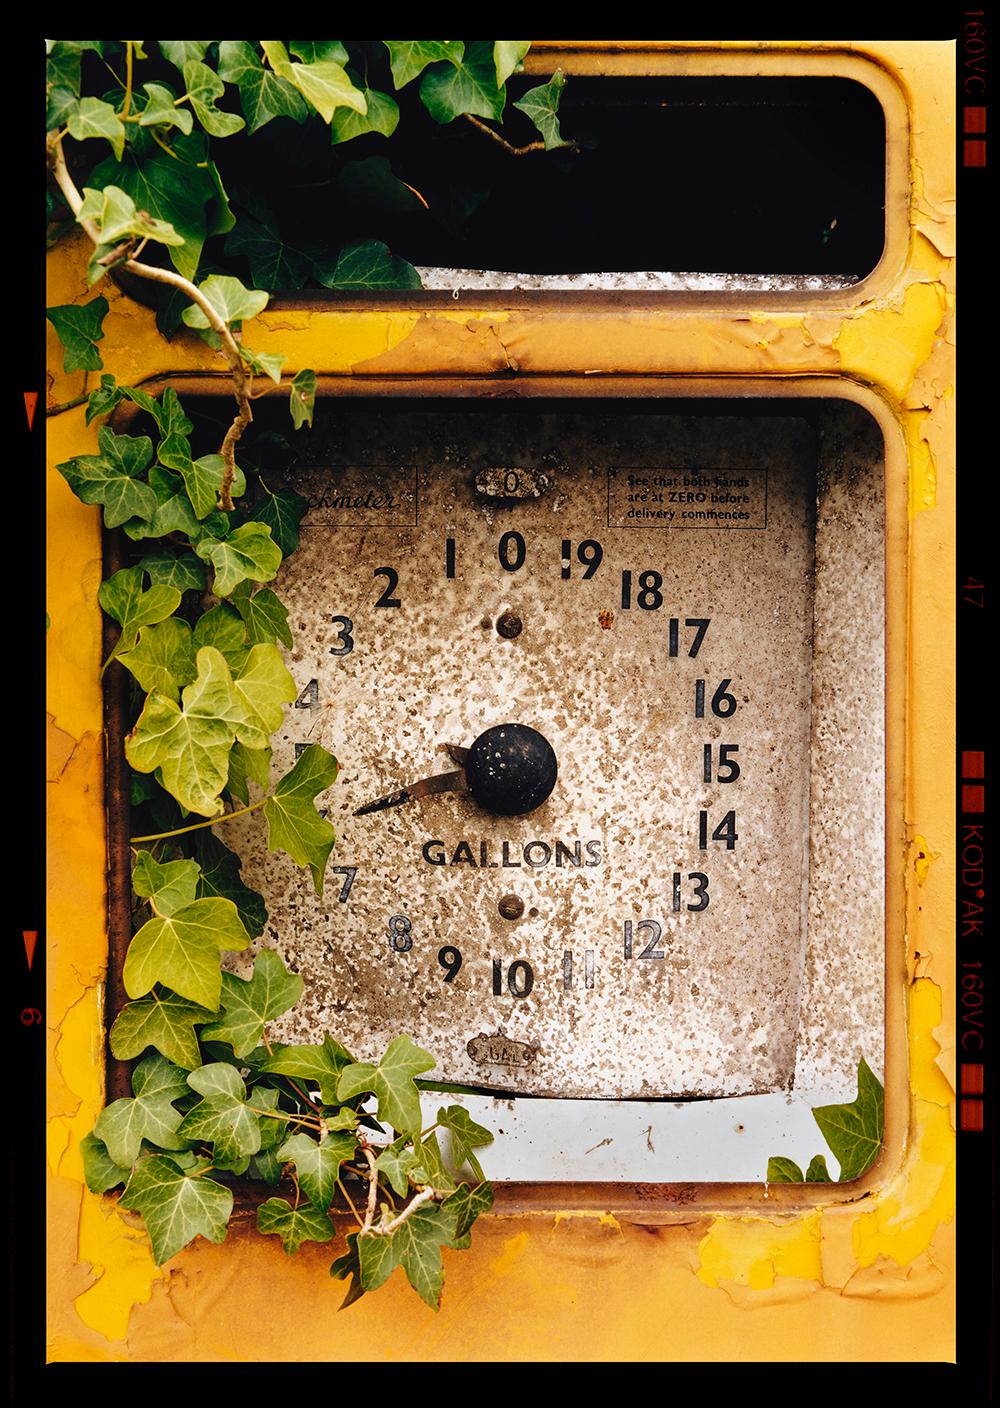 An old fashioned yellow petrol pump, an item that Richard likes to "collect", sitting amongst green ivy. Photographed in Stow Bardolph, Norfolk.

This artwork is a limited edition of 25 gloss photographic print from negative, dry-mounted to